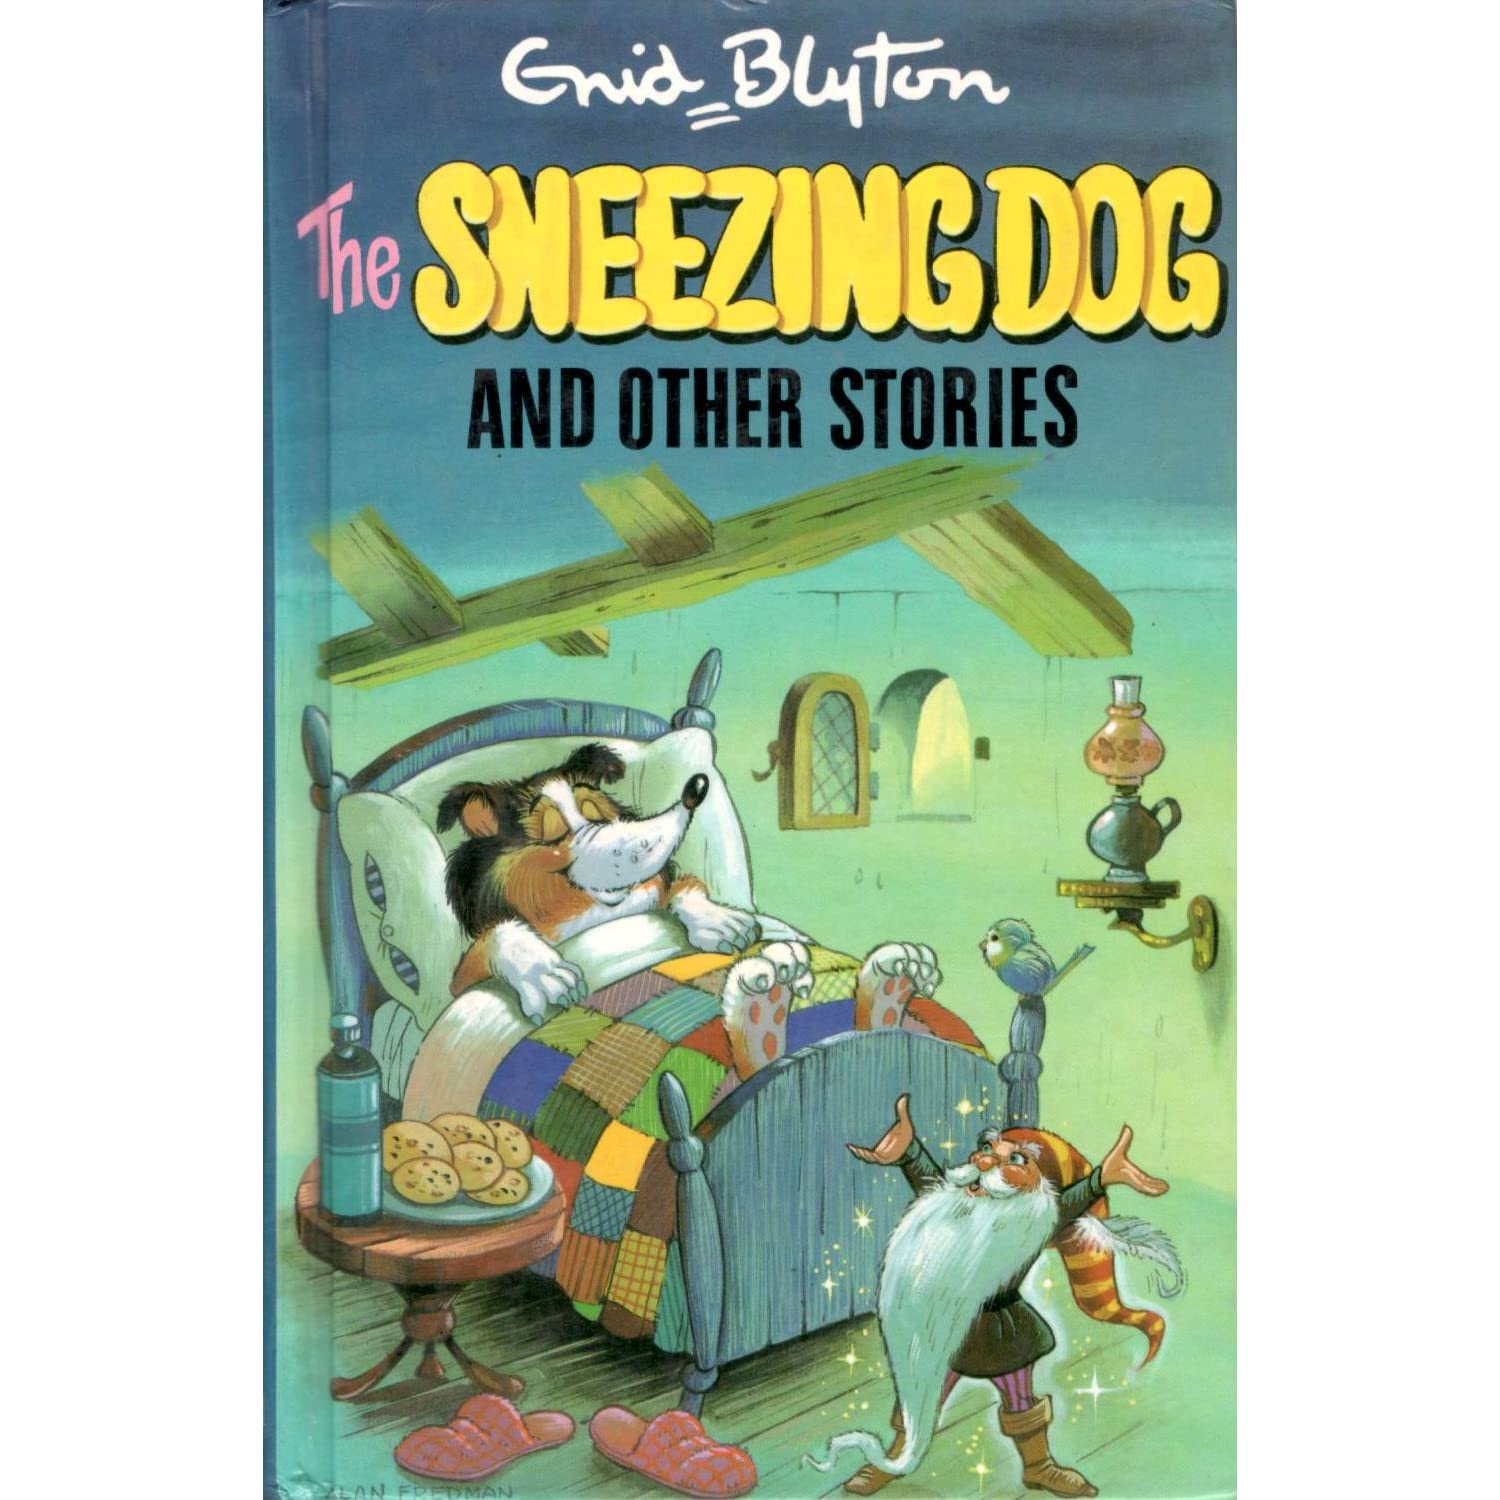 IMG : The Sneezing Dog and Other Stories